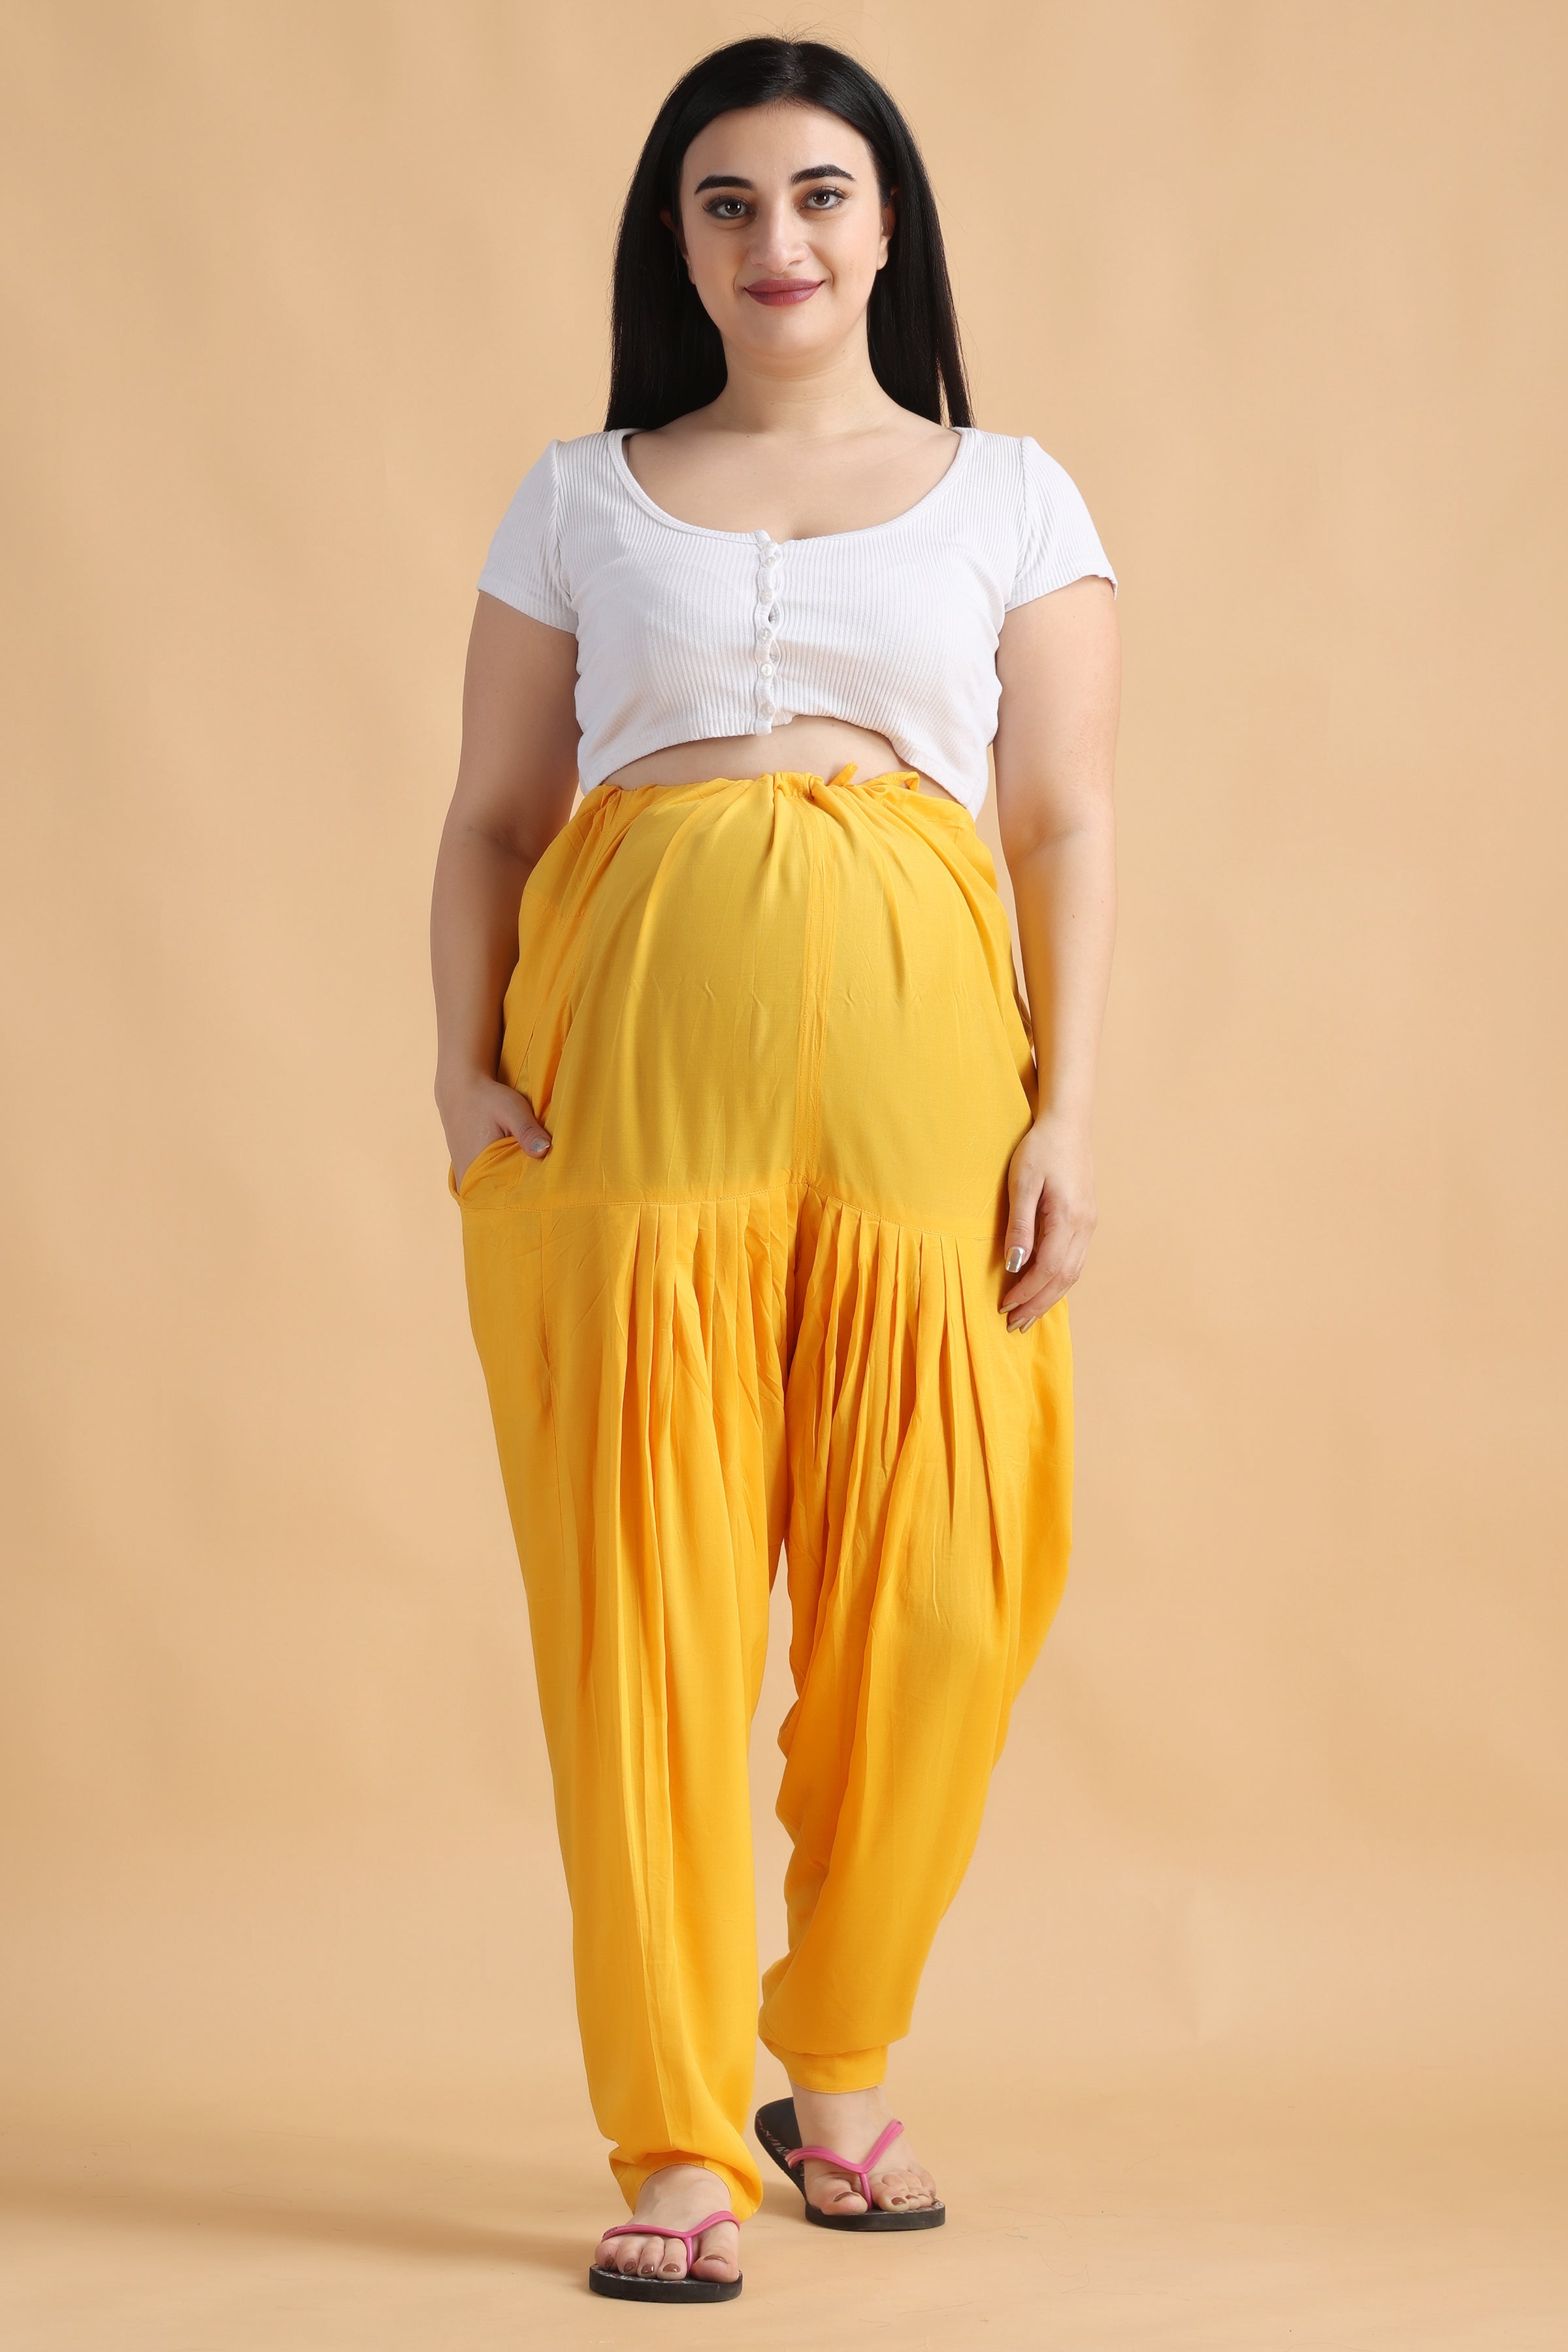 Maternity Pants - Buy Maternity Pants online at Best Prices in India |  Flipkart.com